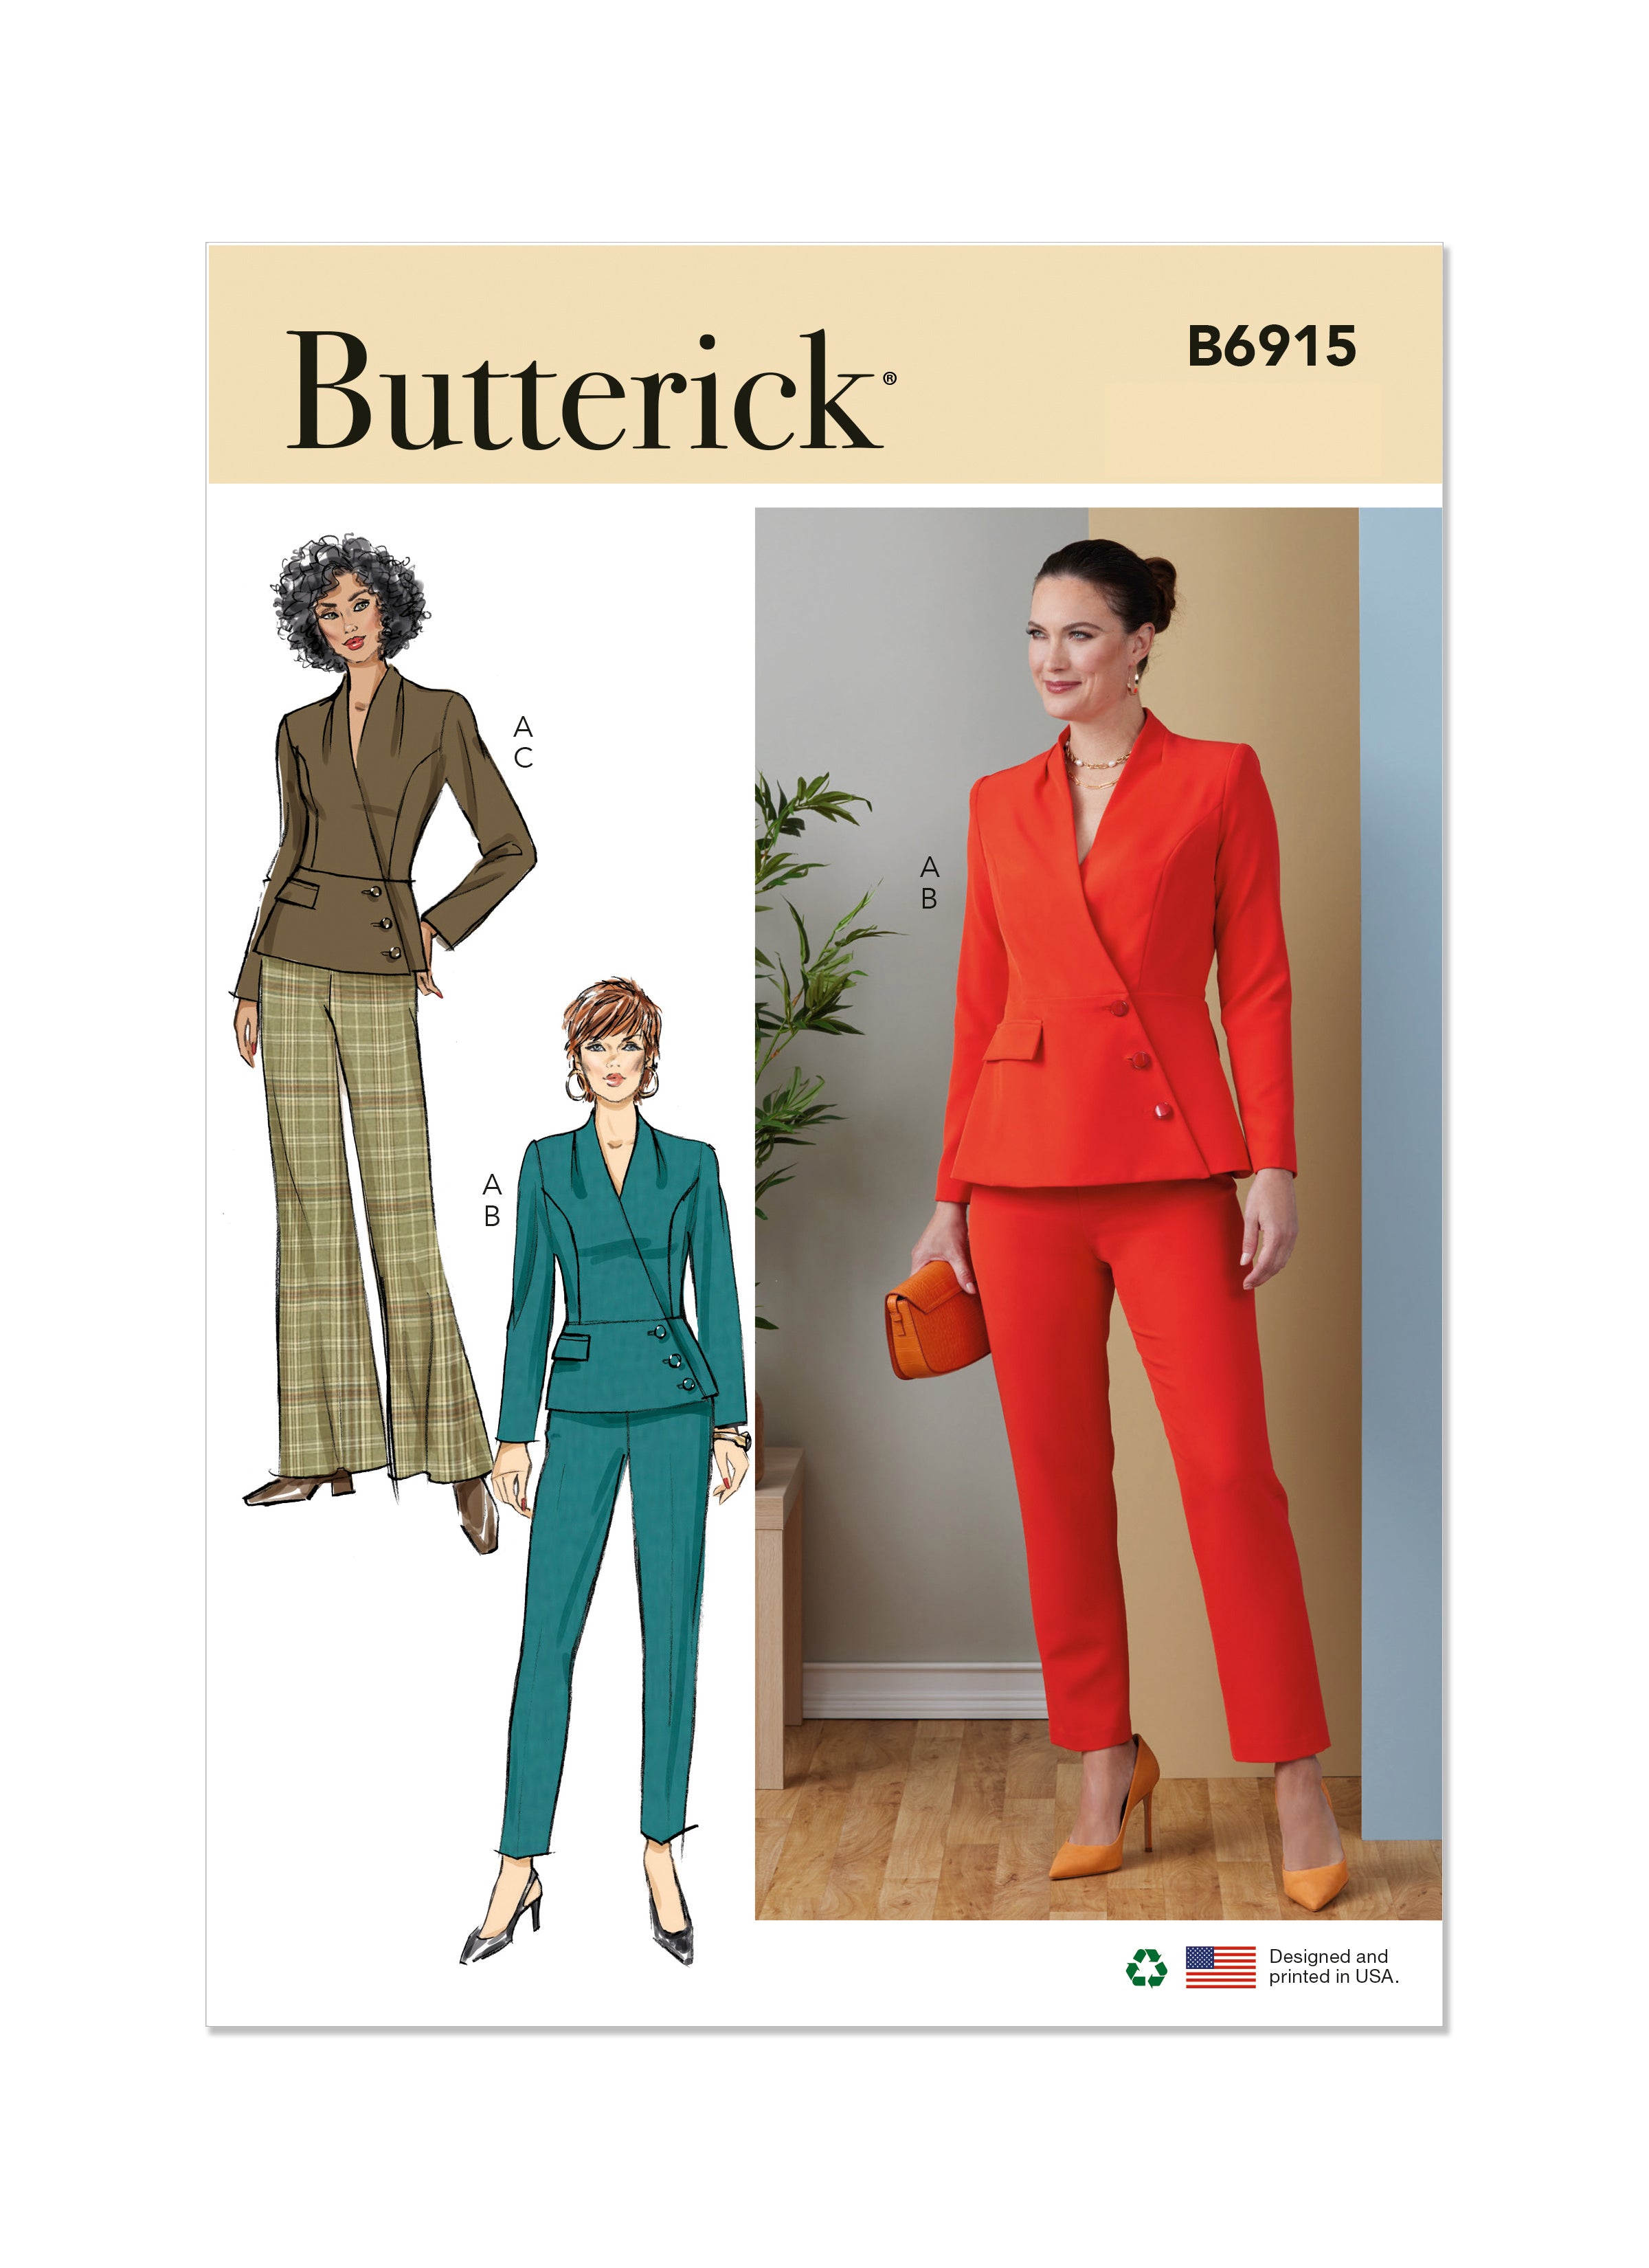 Butterick sewing pattern 6915 Misses' Suit from Jaycotts Sewing Supplies